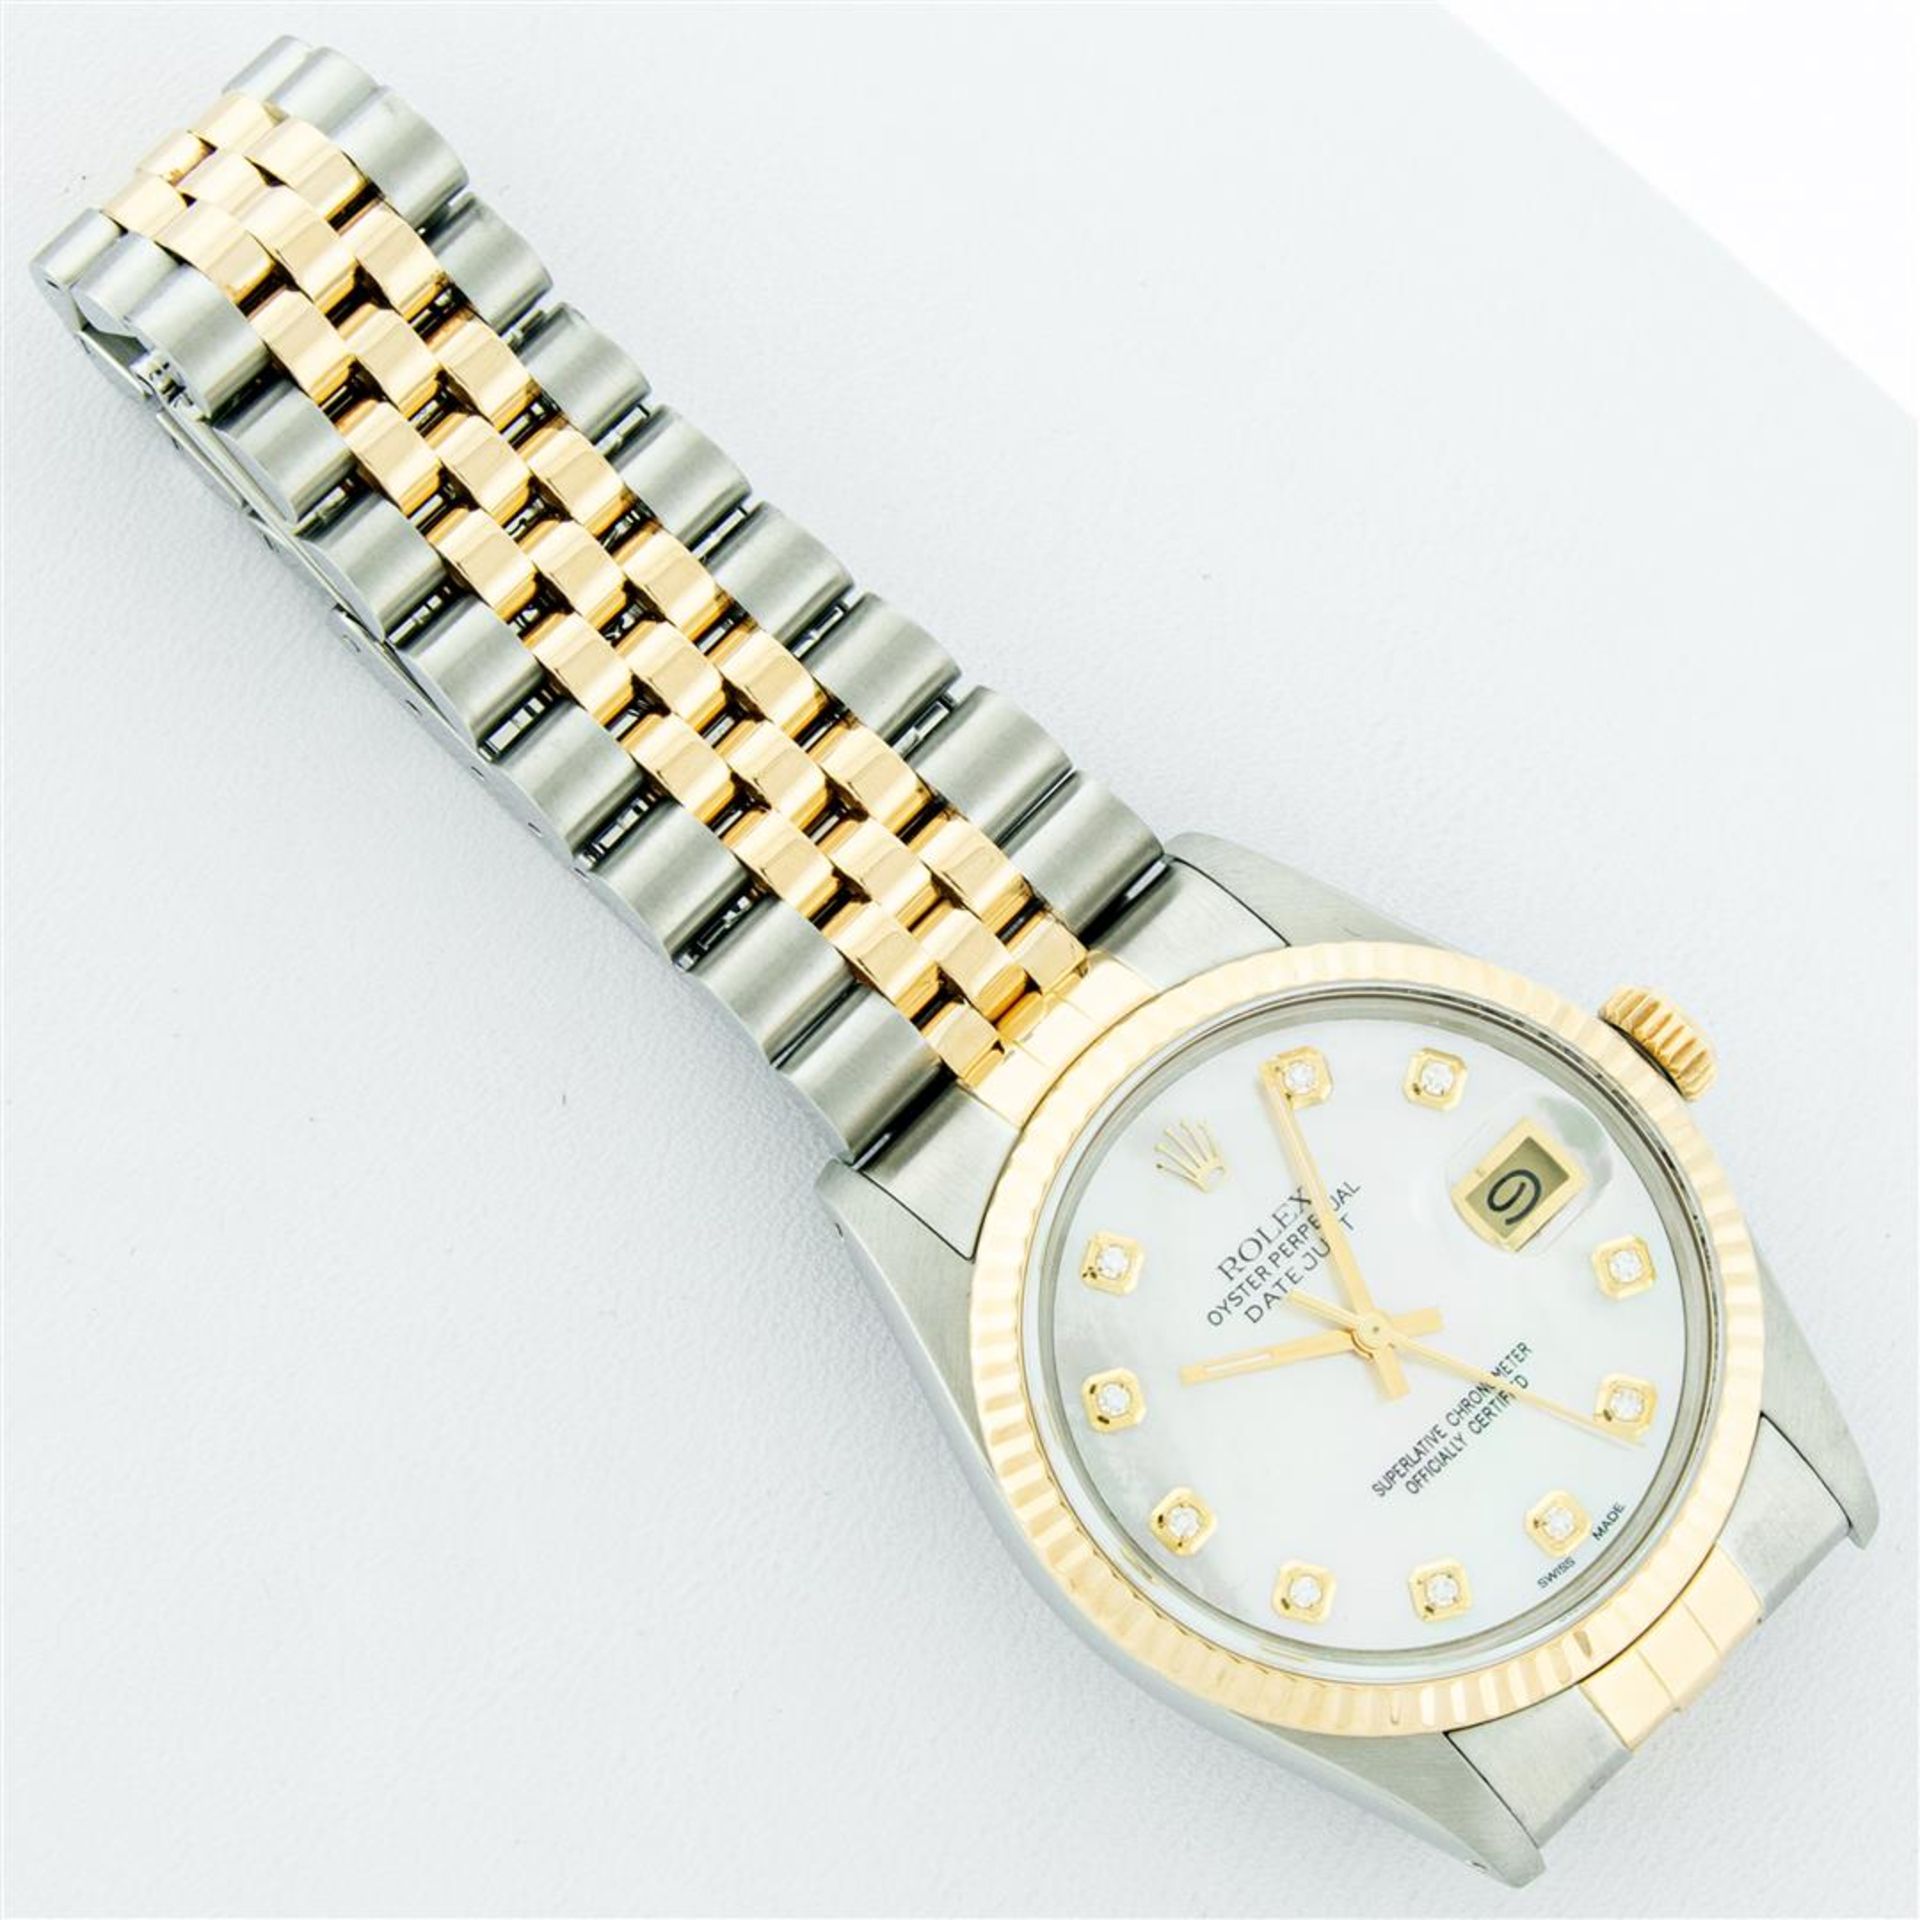 Rolex Mens 2 Tone Mother Of Pearl VS Diamond 36MM Datejust Wristwatch - Image 12 of 18